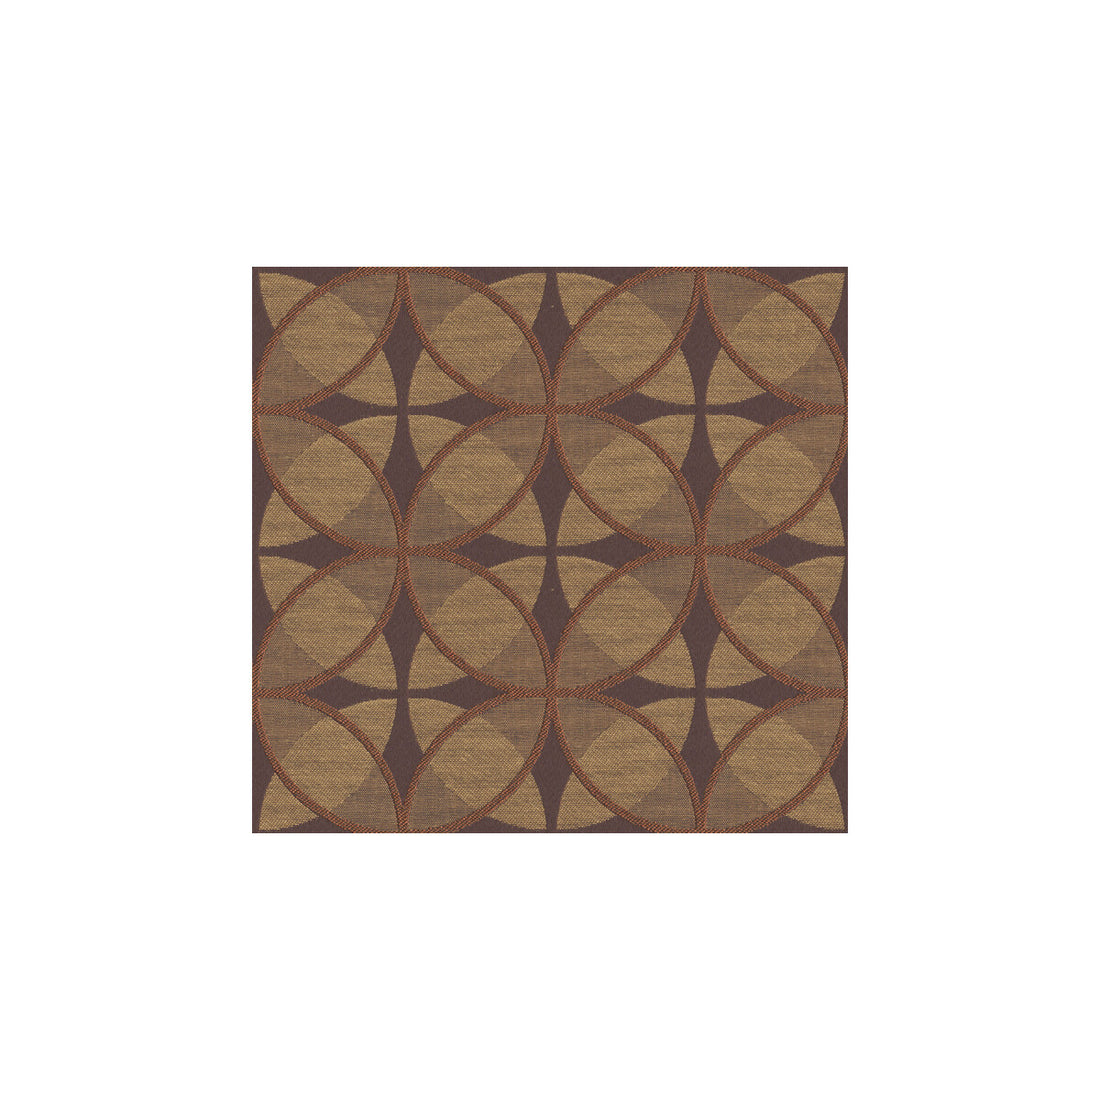 Clockwork fabric in copper color - pattern 31526.6.0 - by Kravet Contract in the Contract Gis collection